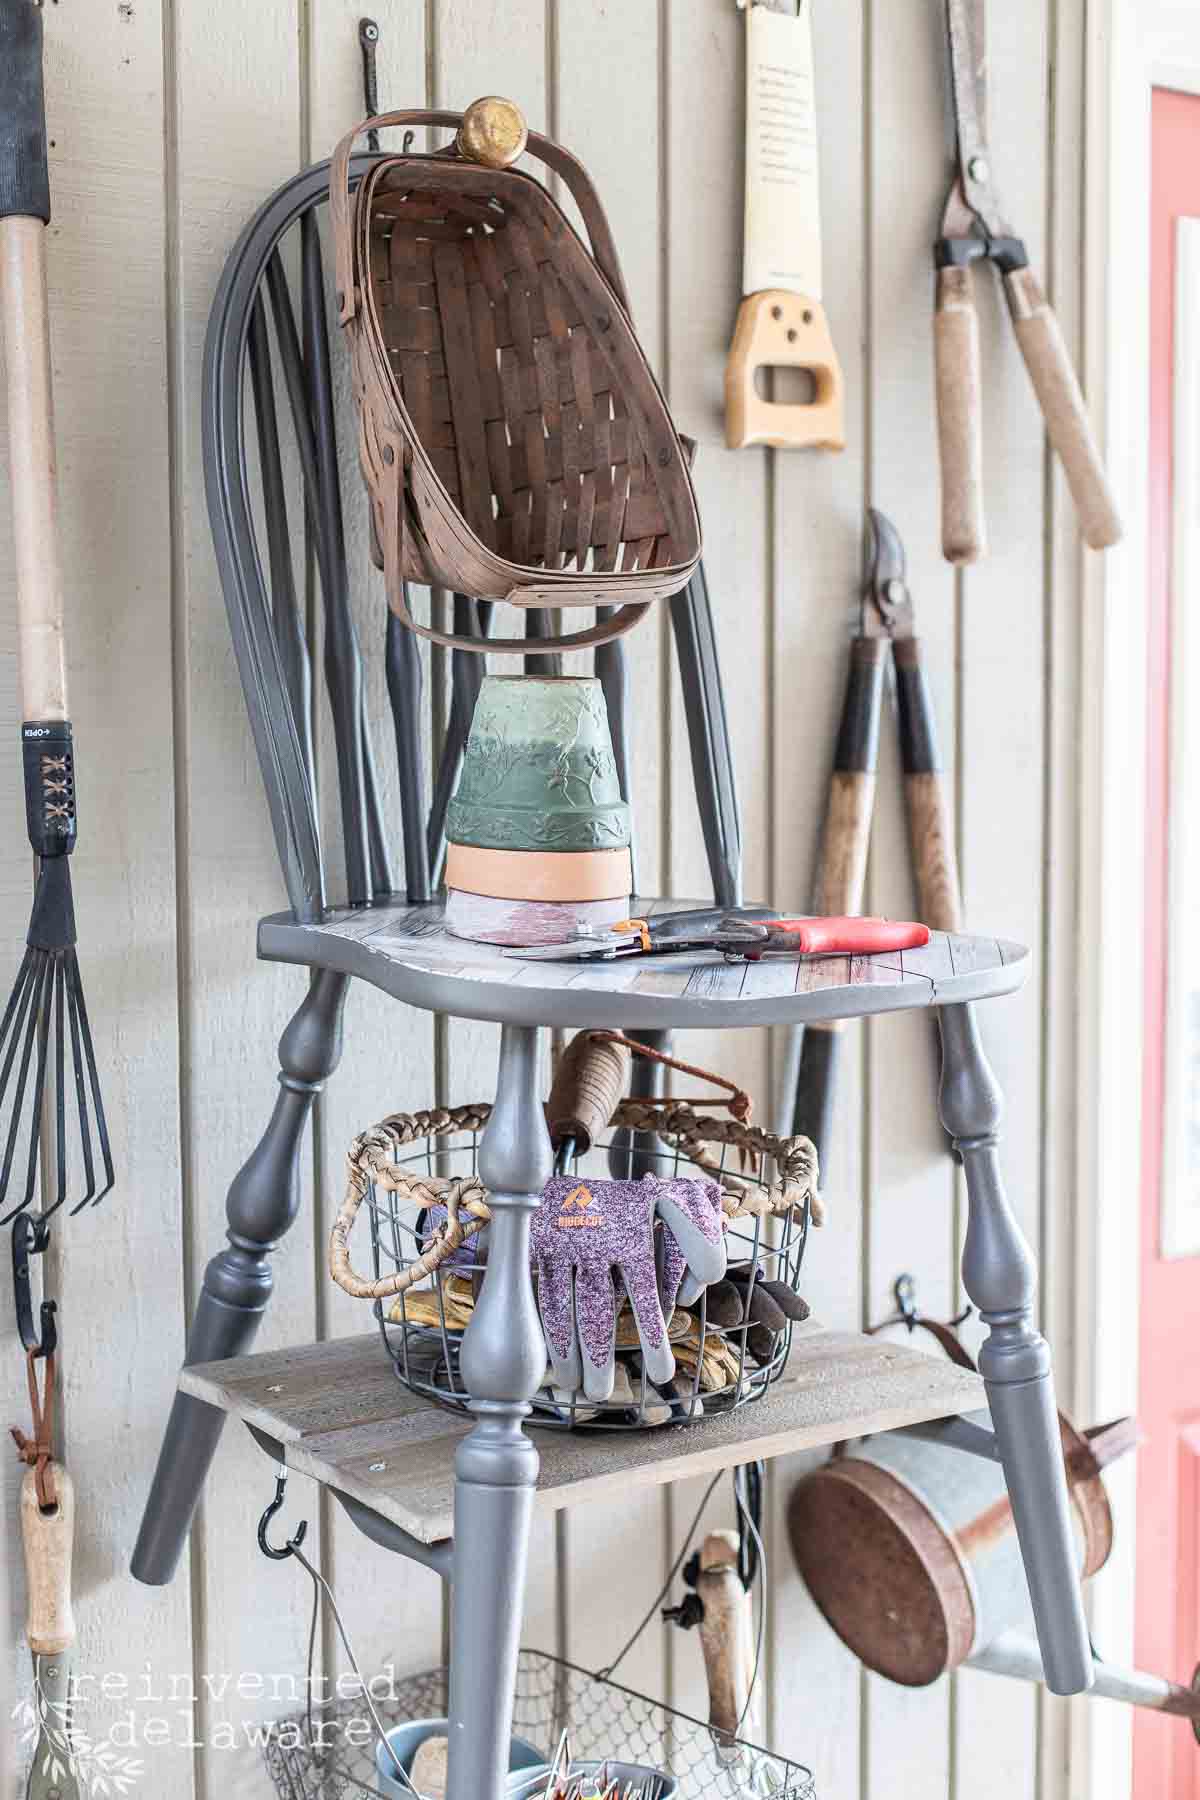 gardening tools organized using an upcycled chair